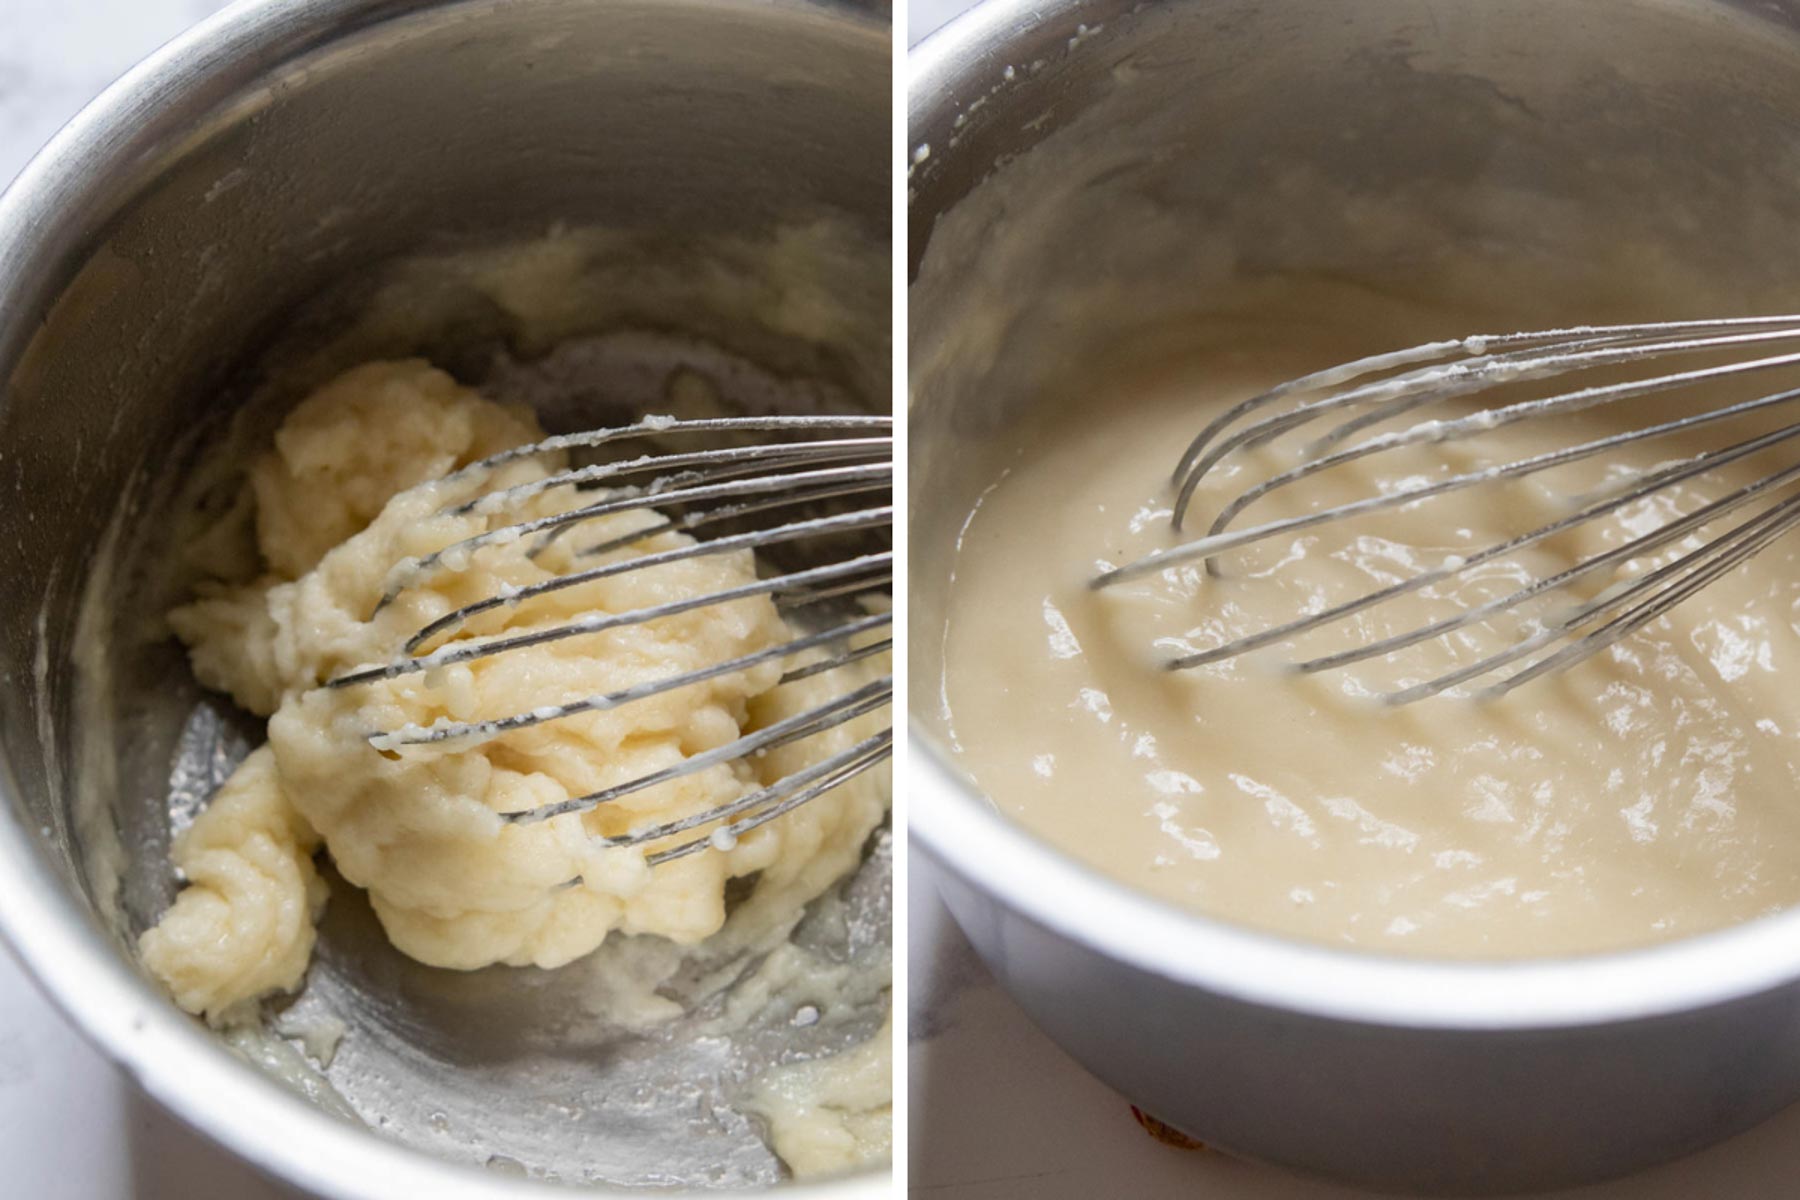 images showing how to make gluten free gravy.